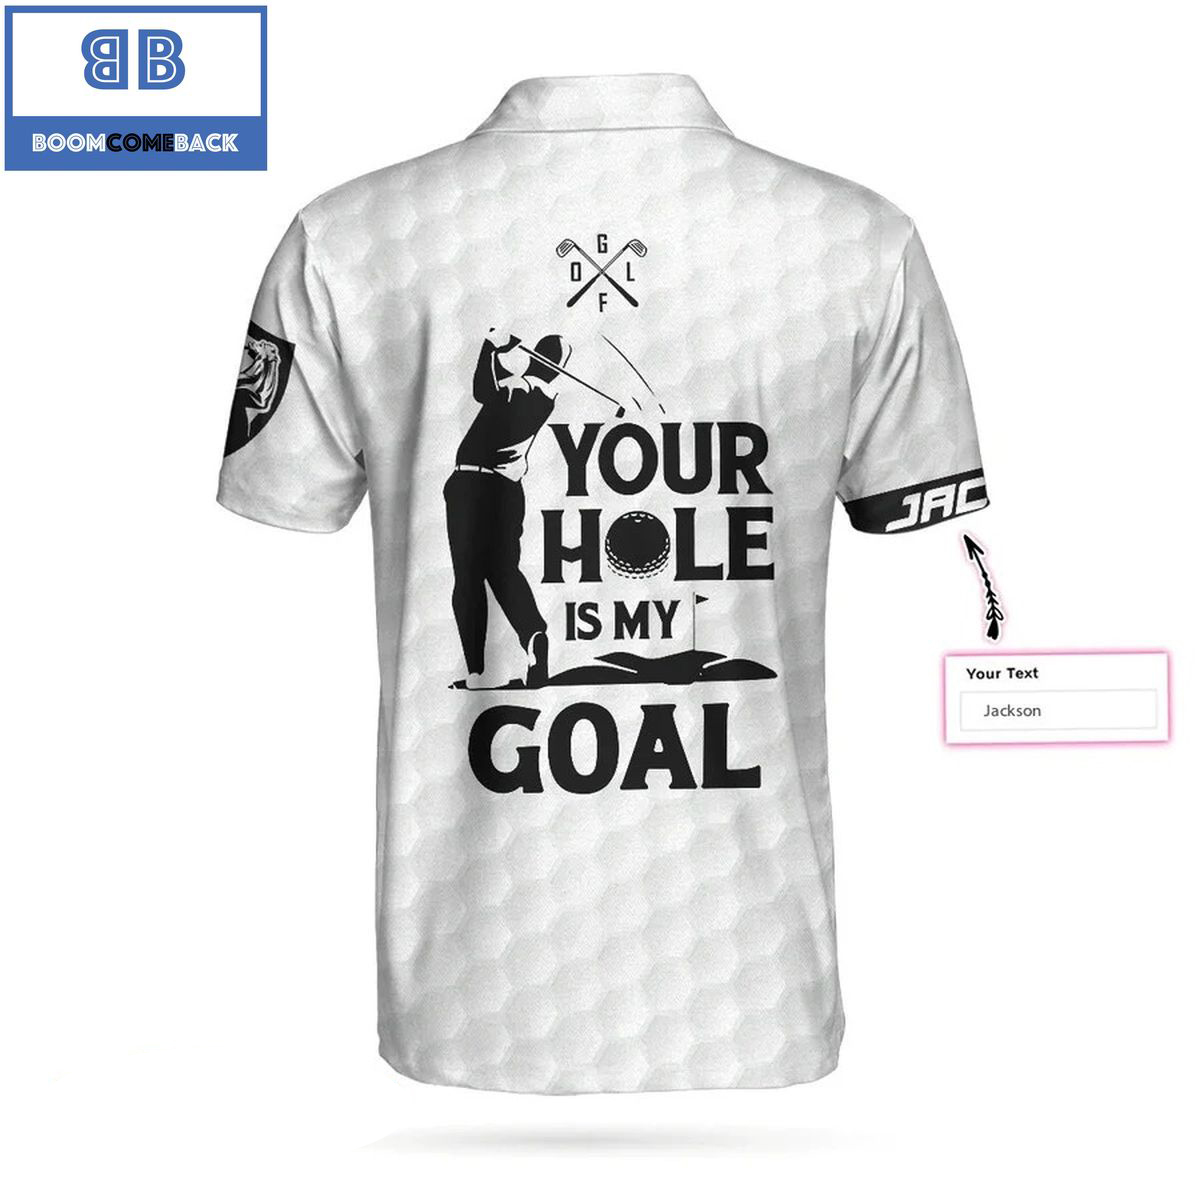 Personalized2BYour2BHole2BIs2BMy2BGoal2BWhite2BAmerican2BFlag2BAthletic2BCollared2BMens2BPolo2BShirt2B5 Pg1Le